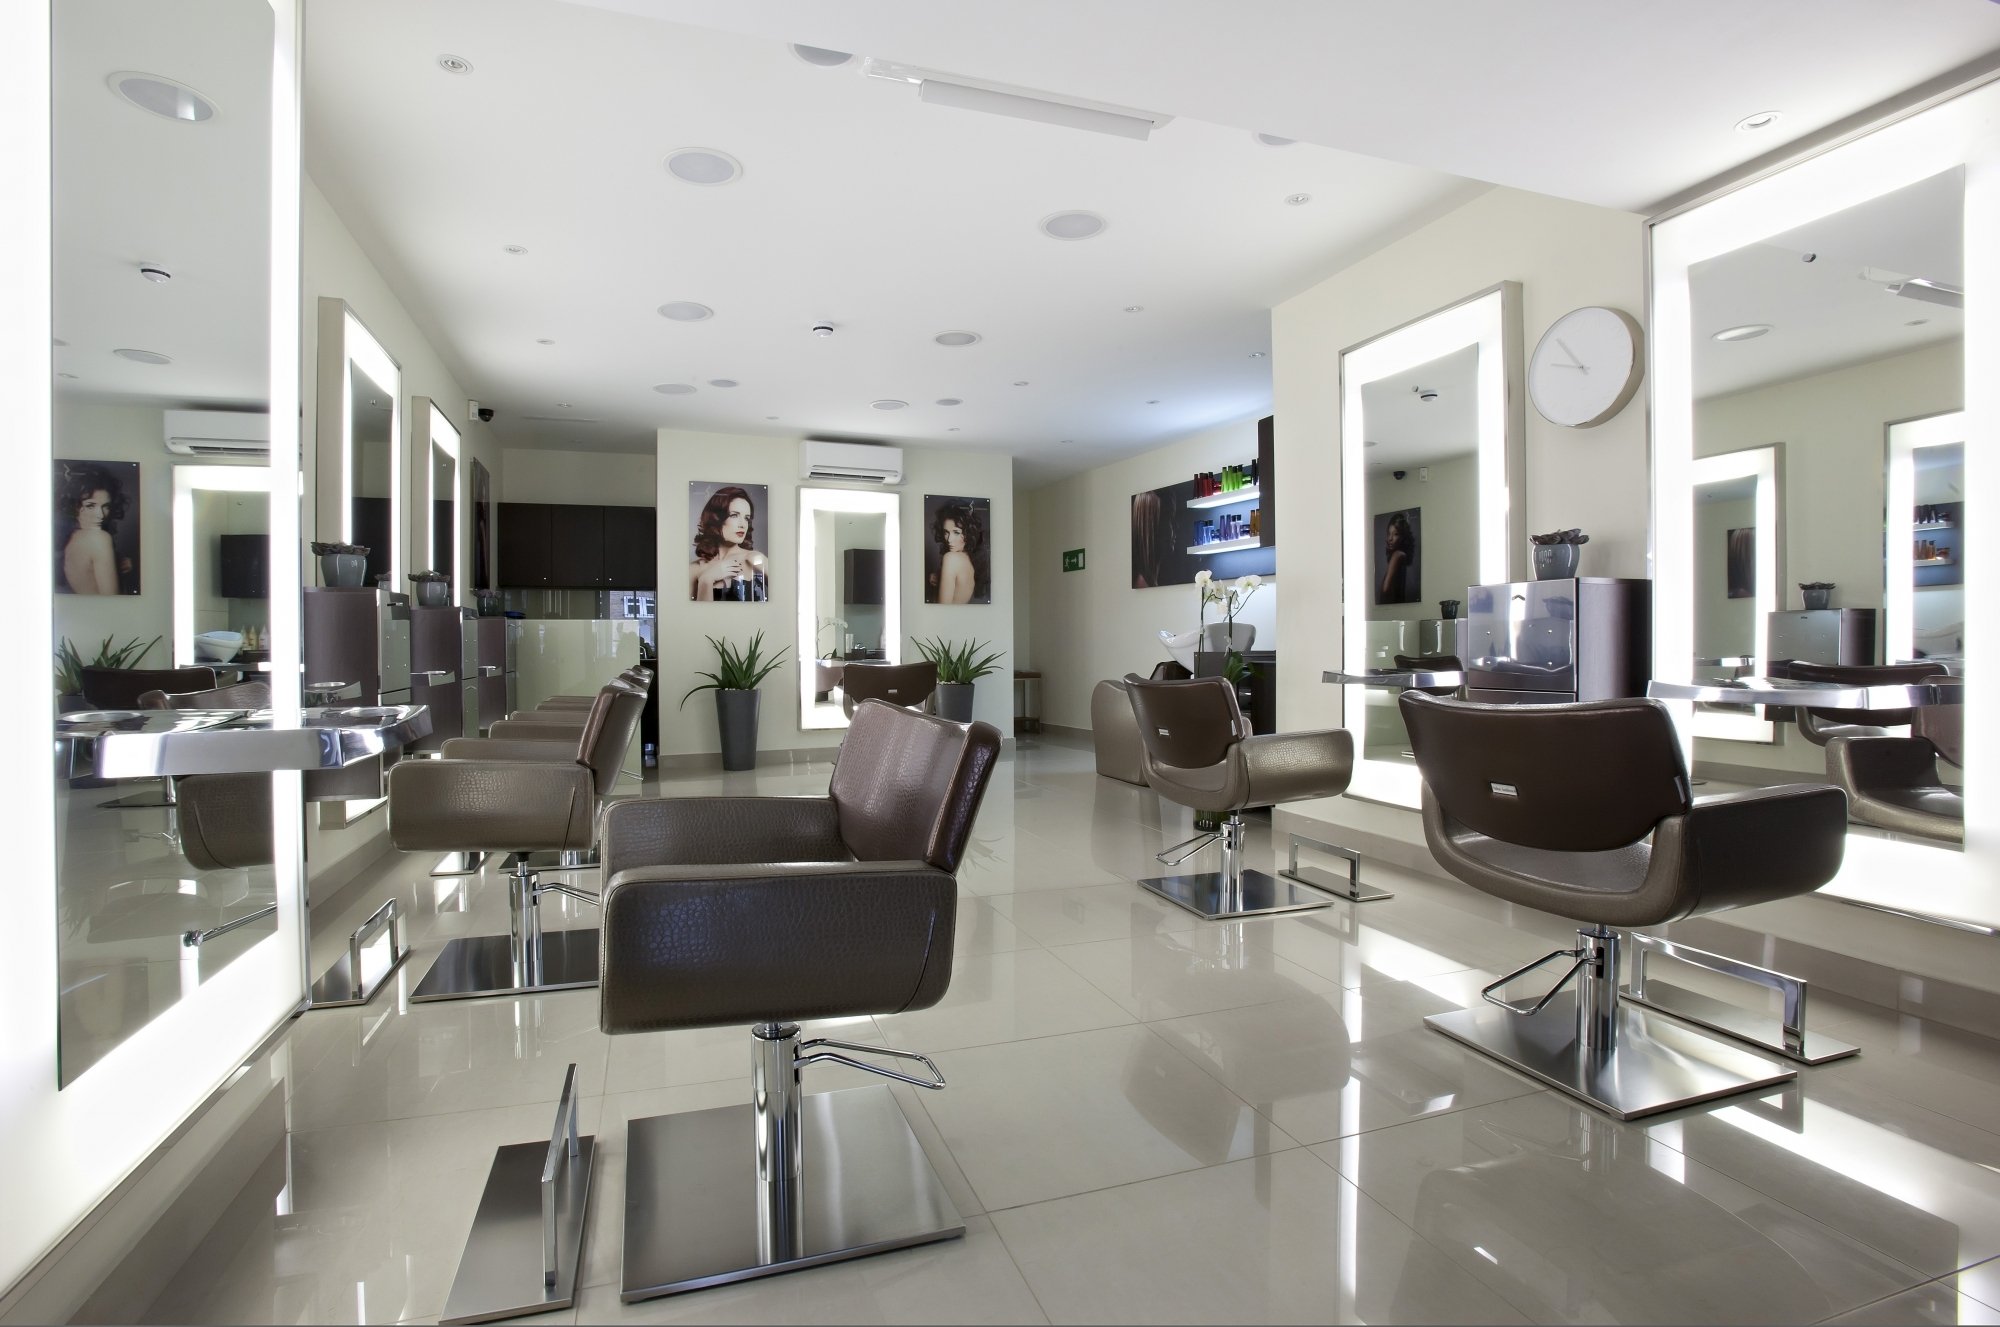 Small salon layout for multiple stylists, Smooth You Salon – London, England.